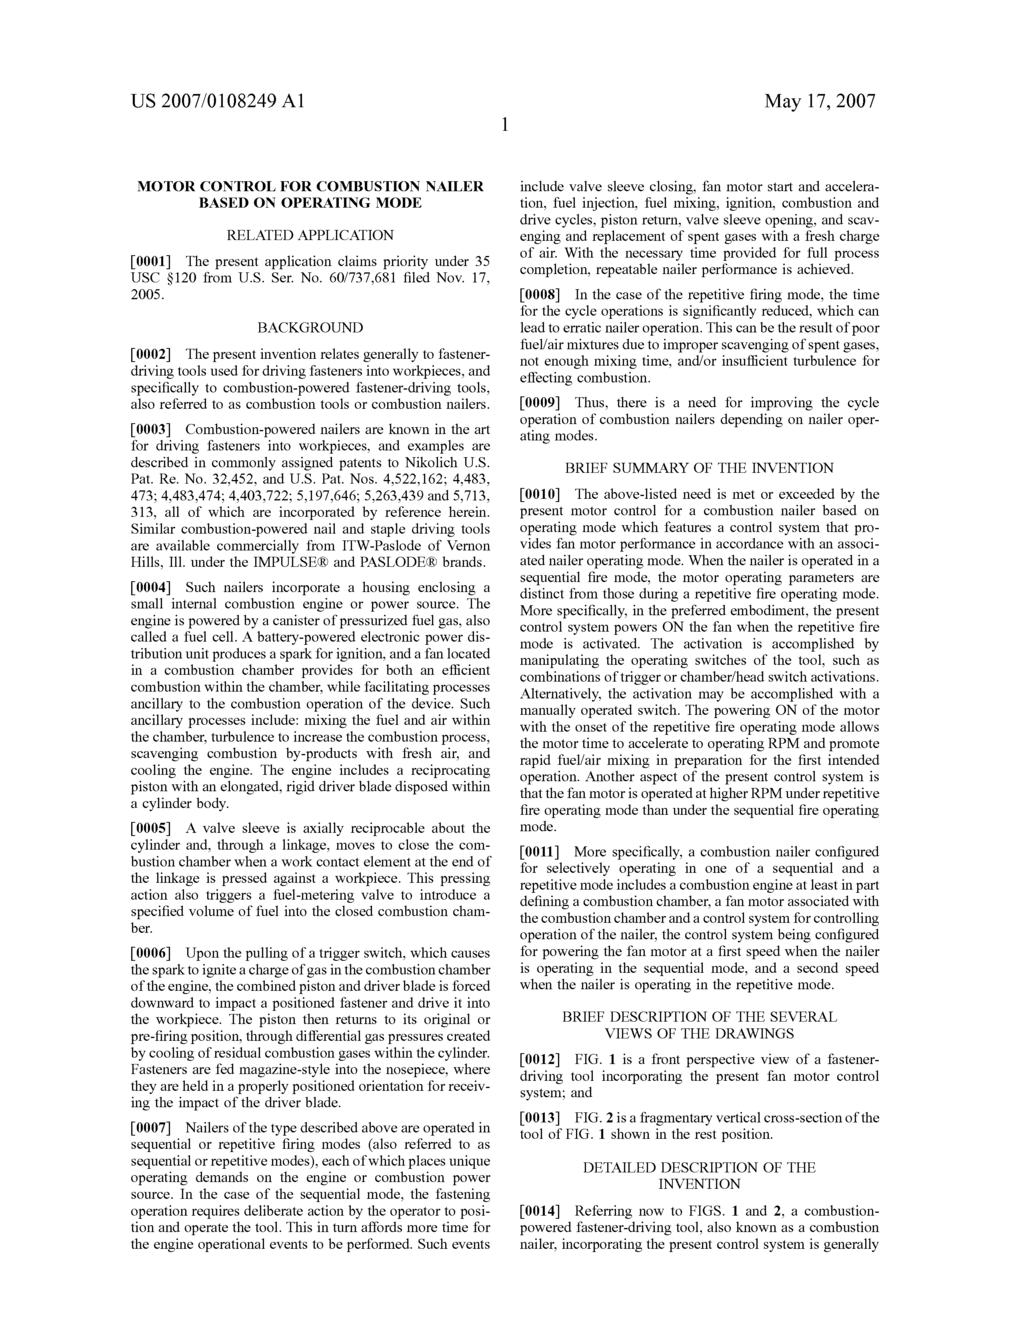 MOTOR CONTROL FOR COMBUSTION NALER BASED ON OPERATING MODE RELATED APPLICATION 0001. The present application claims priority under 35 USC S120 from U.S. Ser. No. 60/737,681 filed Nov. 17, 2005.